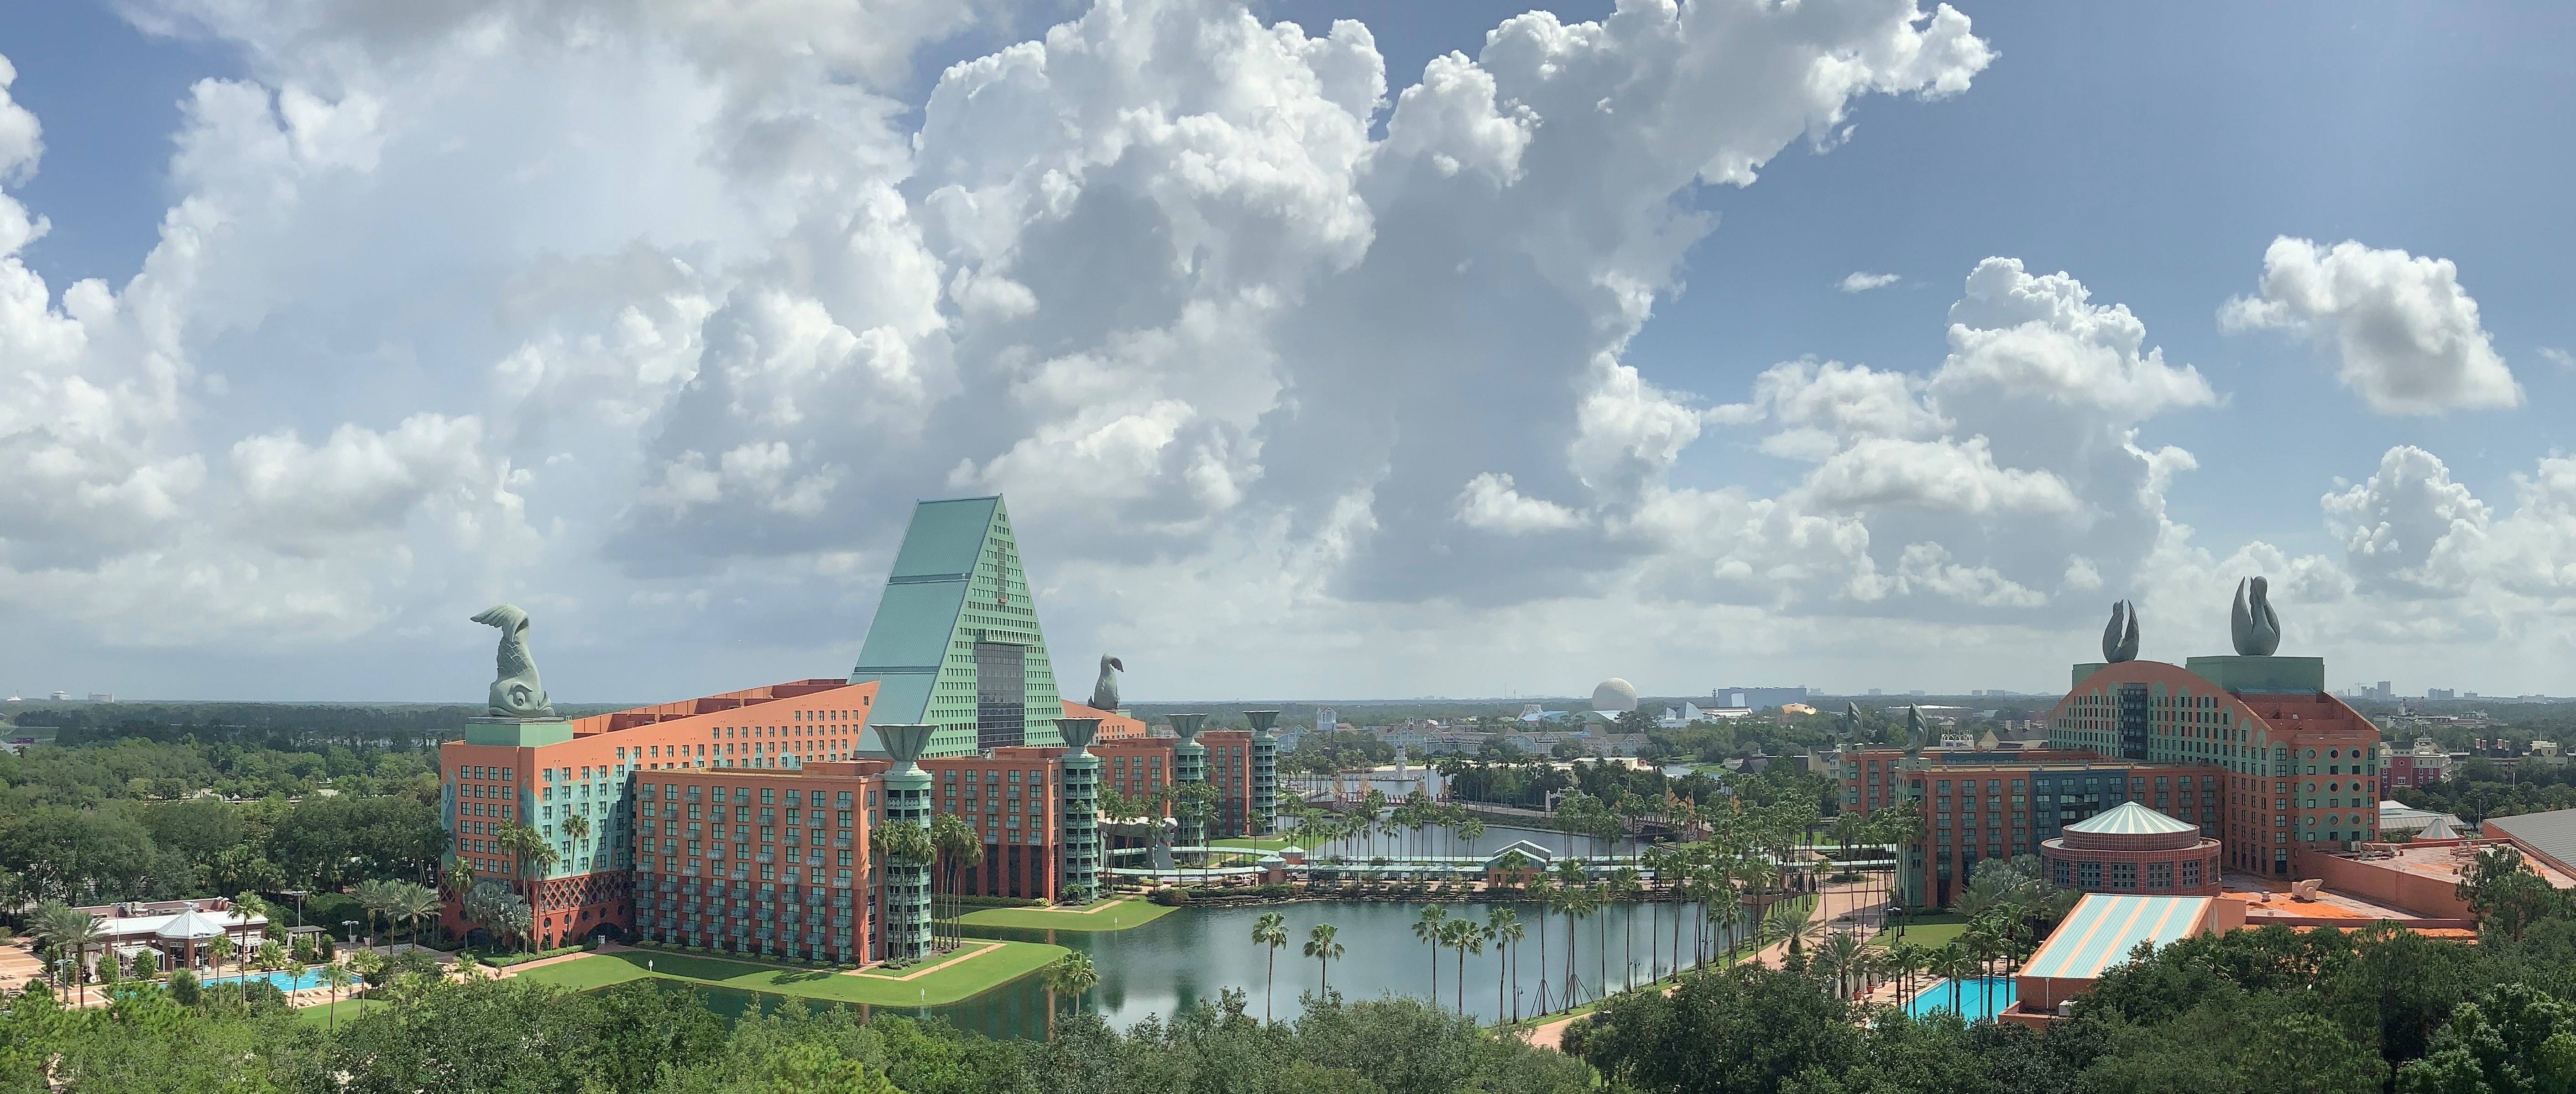 View from the top of the Walt Disney World Swan Reserve